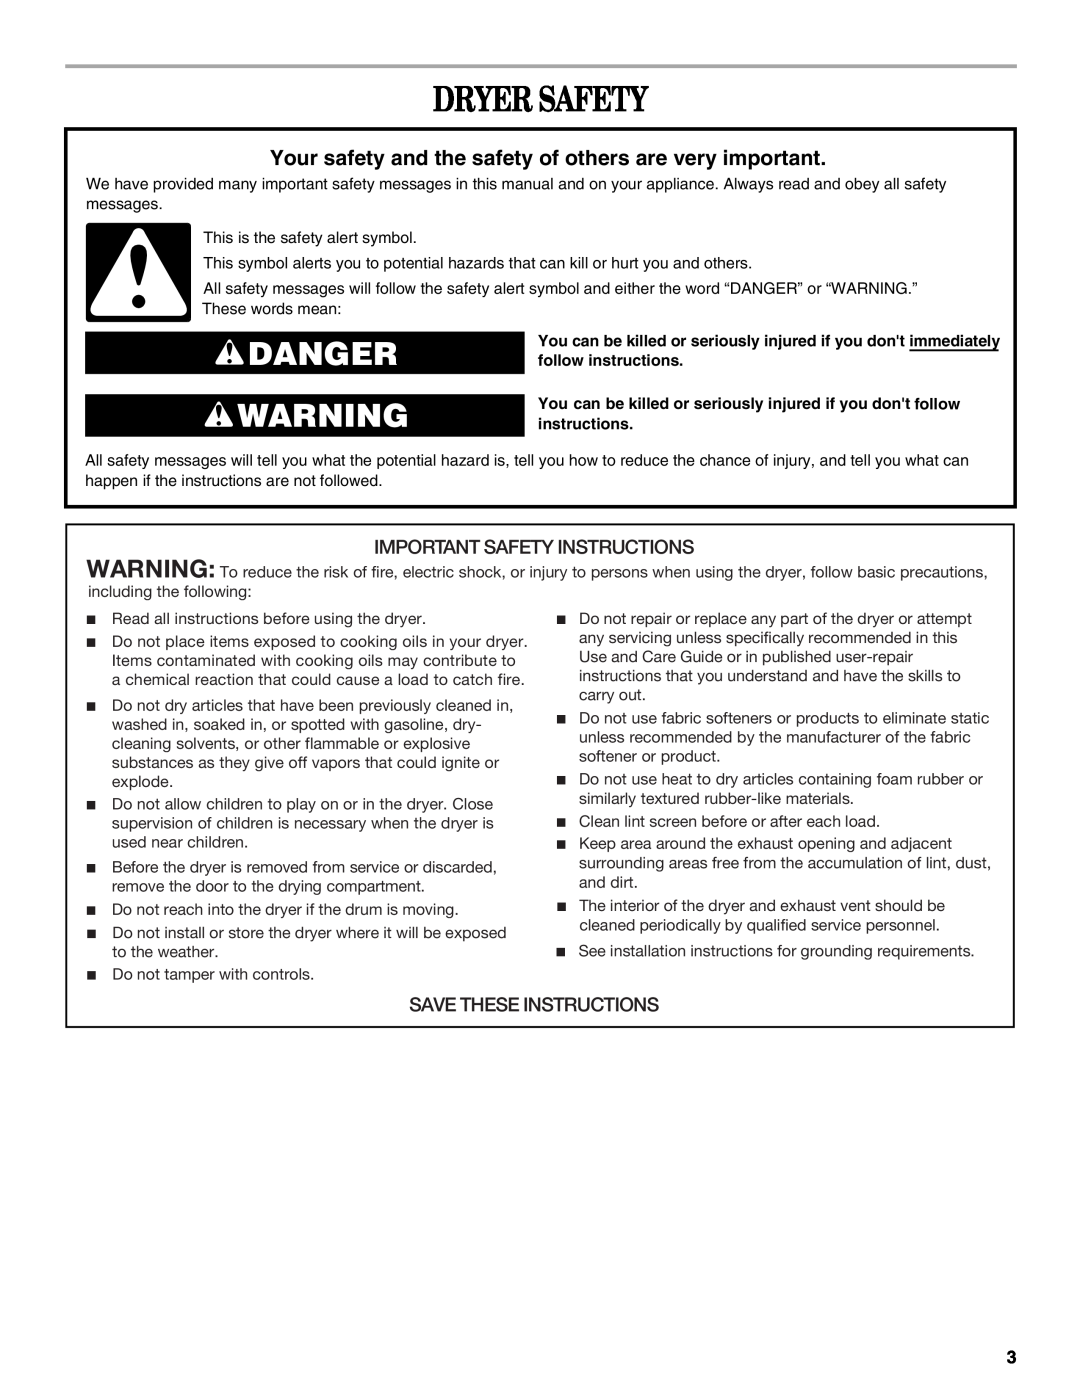 Whirlpool 8578901 Dryer Safety, Danger, Your safety and the safety of others are very important, Save These Instructions 